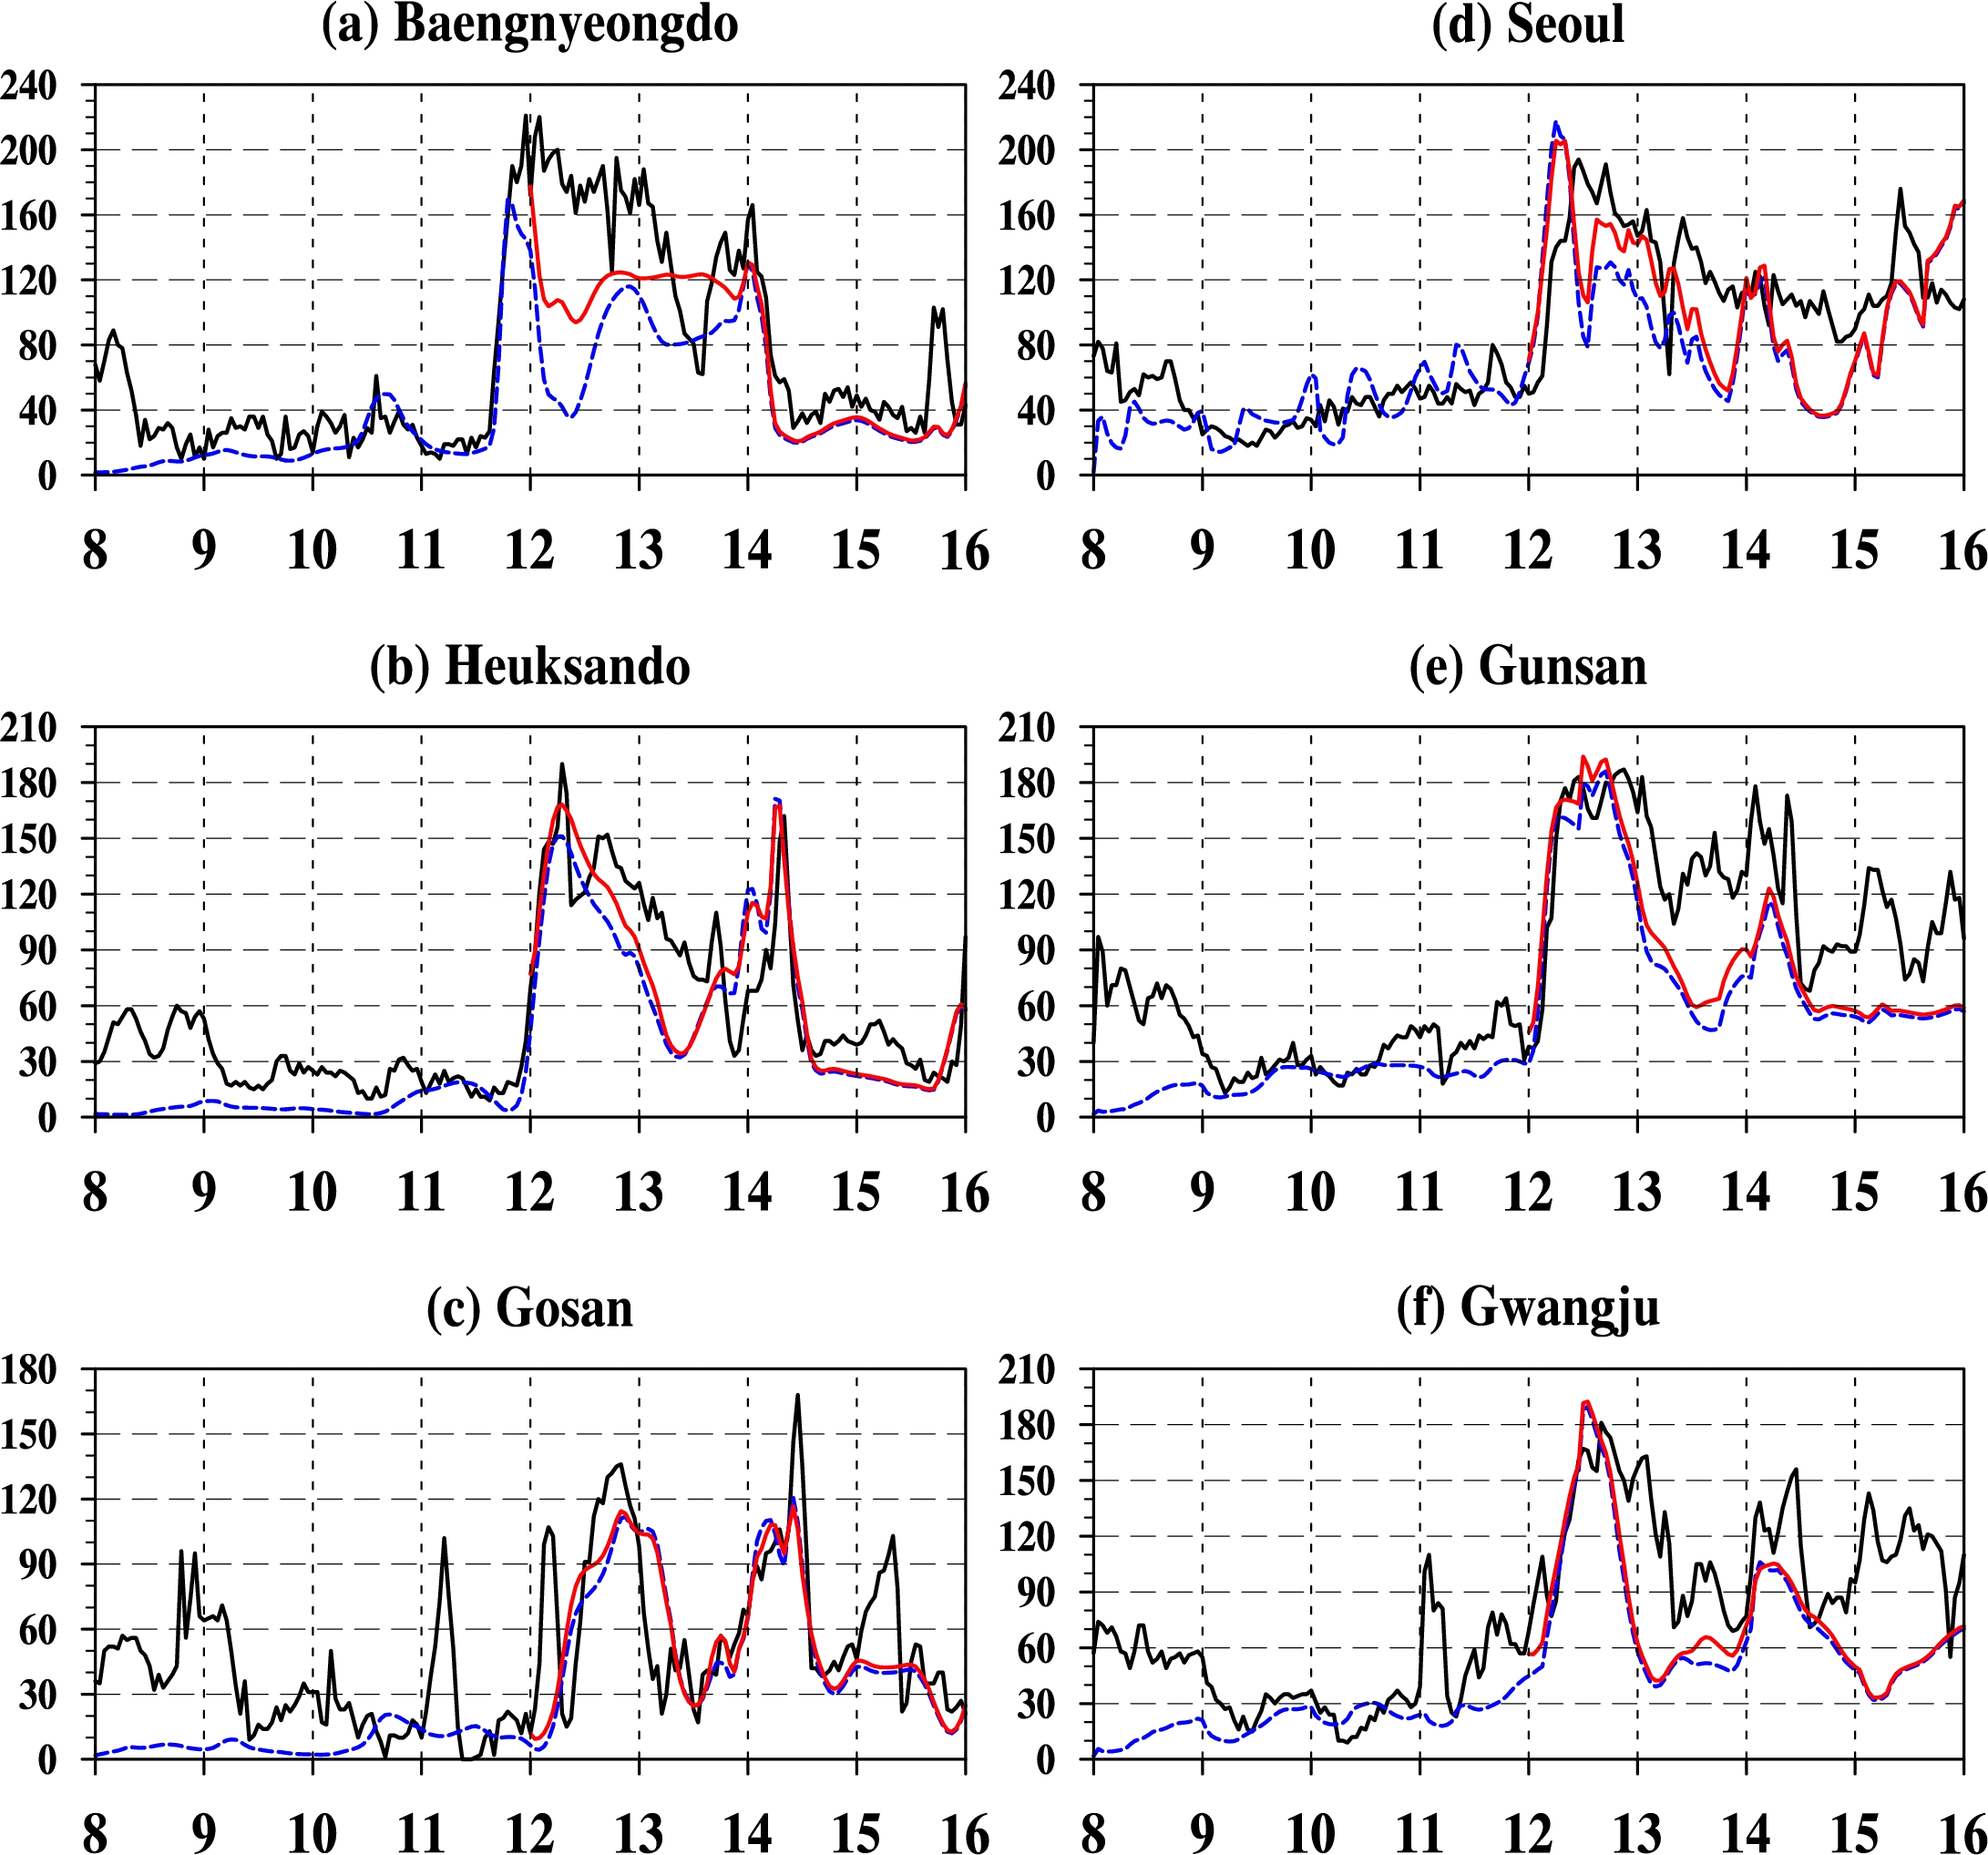 Fig. 3.2.17 The time series of PM10 concentrations obtained from observation(------), control experiment(------) and 3DOI experiment(------) at (a) Baengnyengdo, (b) Heuksando, (c) Gosan, (d) Seoul, (e) Gunsan, and (f) Gwangju.